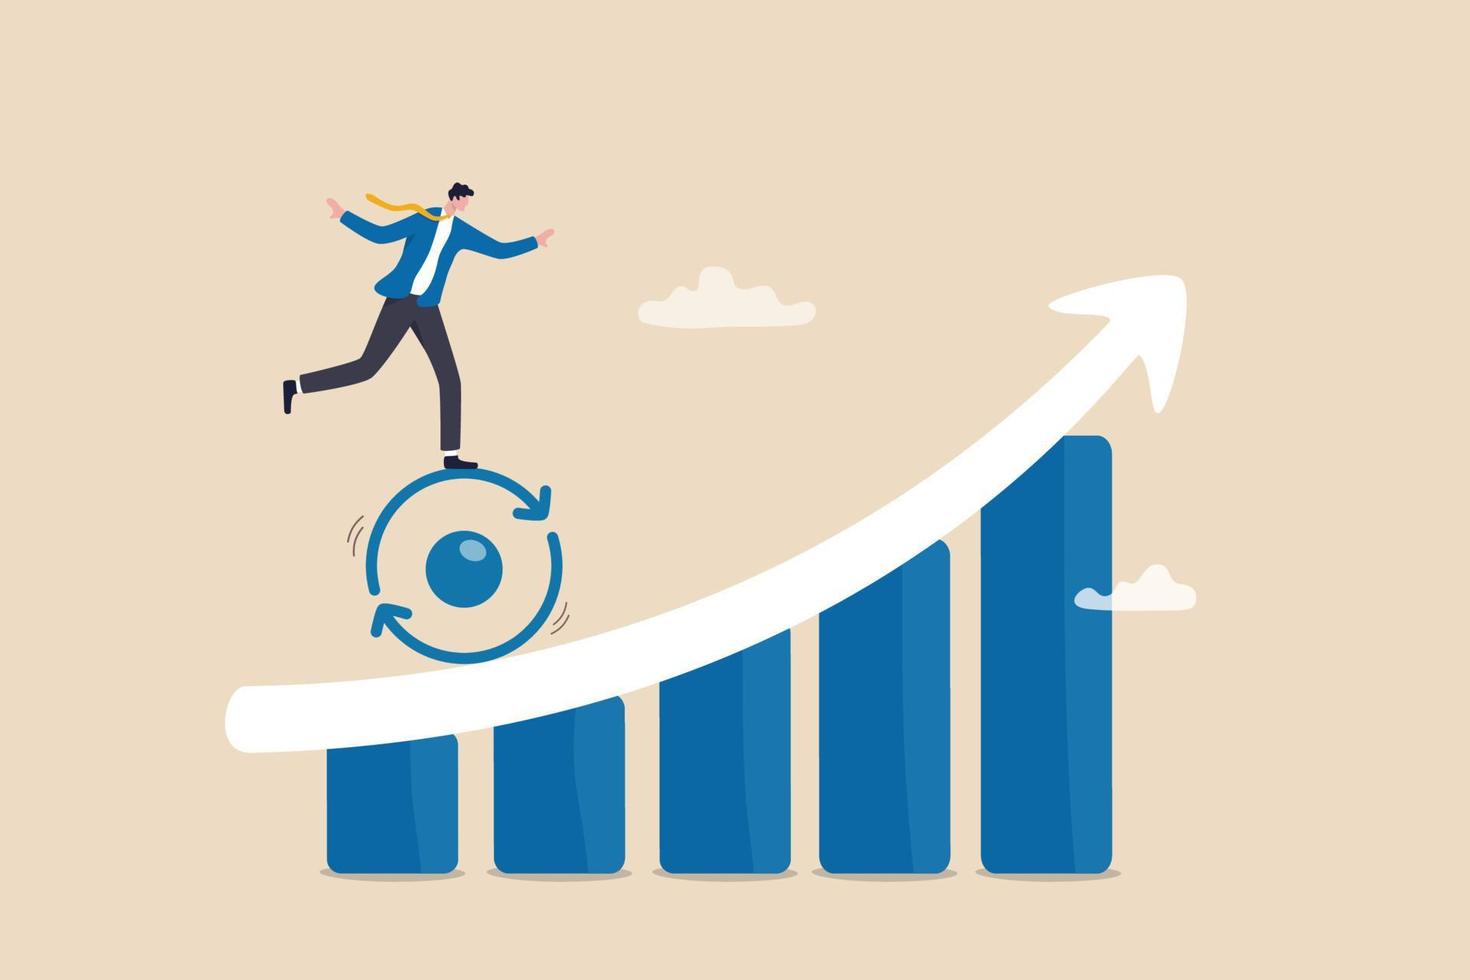 Continuous improvement, development cycle to improve quality, business strategy to grow and success, growth development concept, businessman riding improvement cycle uphill on growth business graph. vector